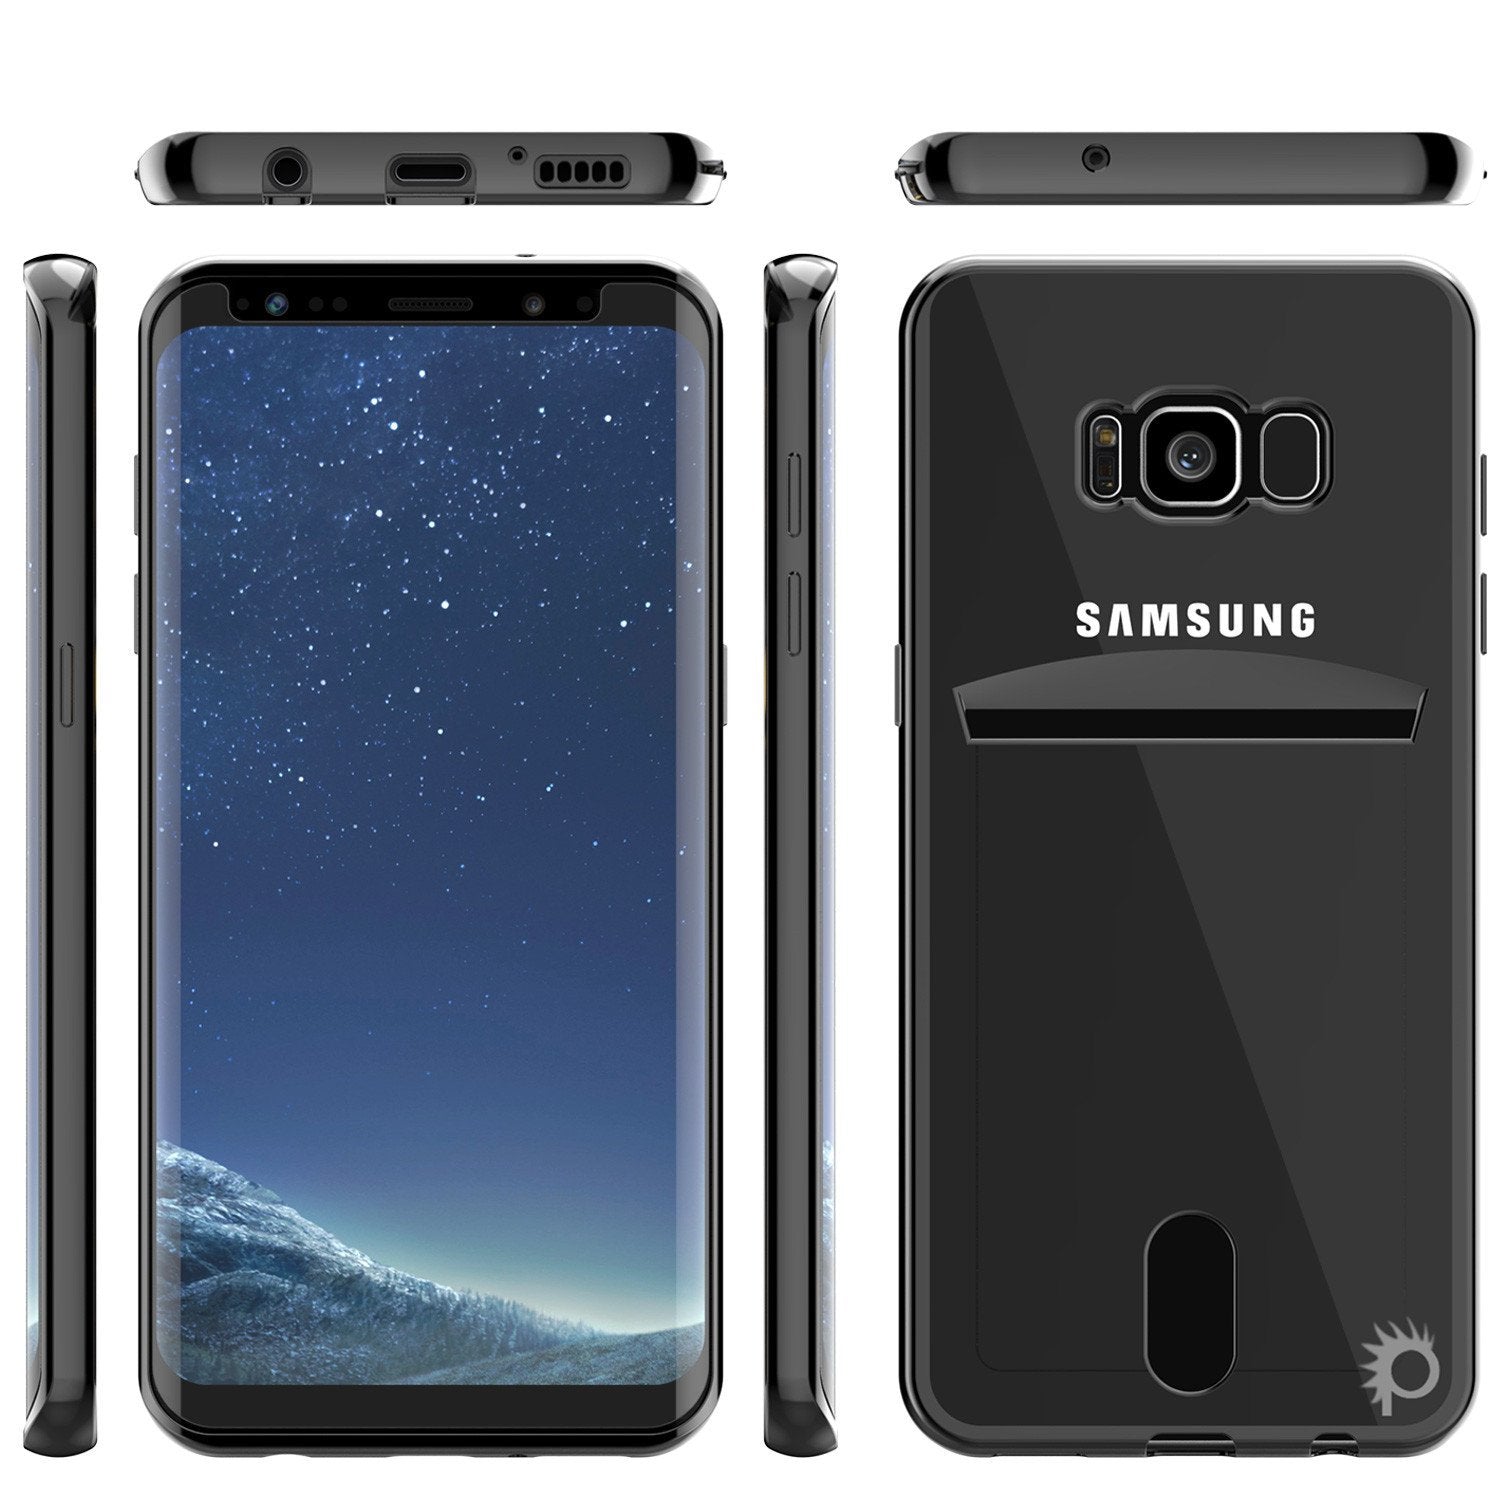 Galaxy S8 Plus Case, PunkCase LUCID Black Series Screen Protector